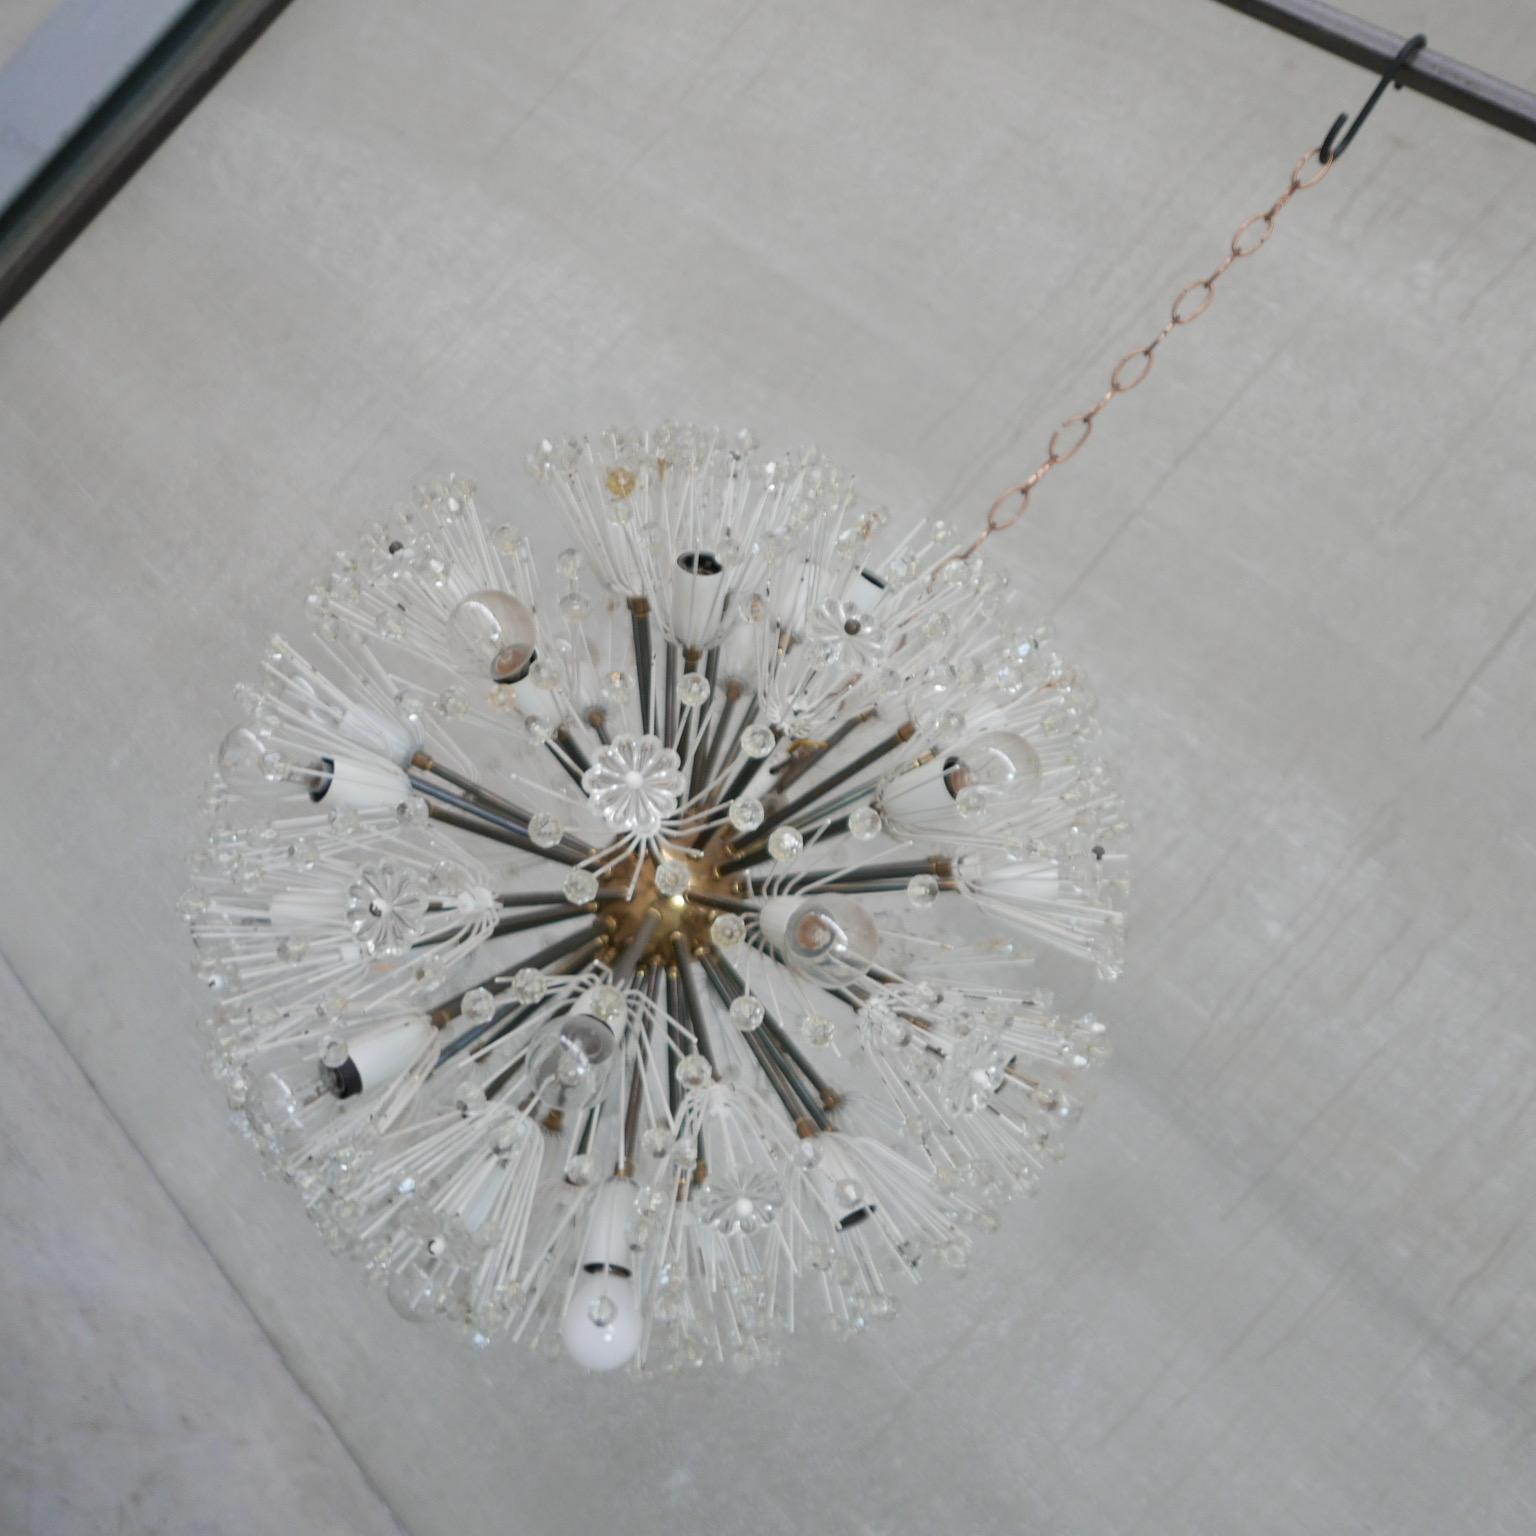 An early model pendant light by Emil Stejnar for Rupert Nikoll. 

Austria, c1950s. 

Brass centre with glass decorations. 

Hung on a chain. 

Re-wired and PAT tested.

Location: Belgium Gallery. 

Dimensions: 55 Diameter in cm.